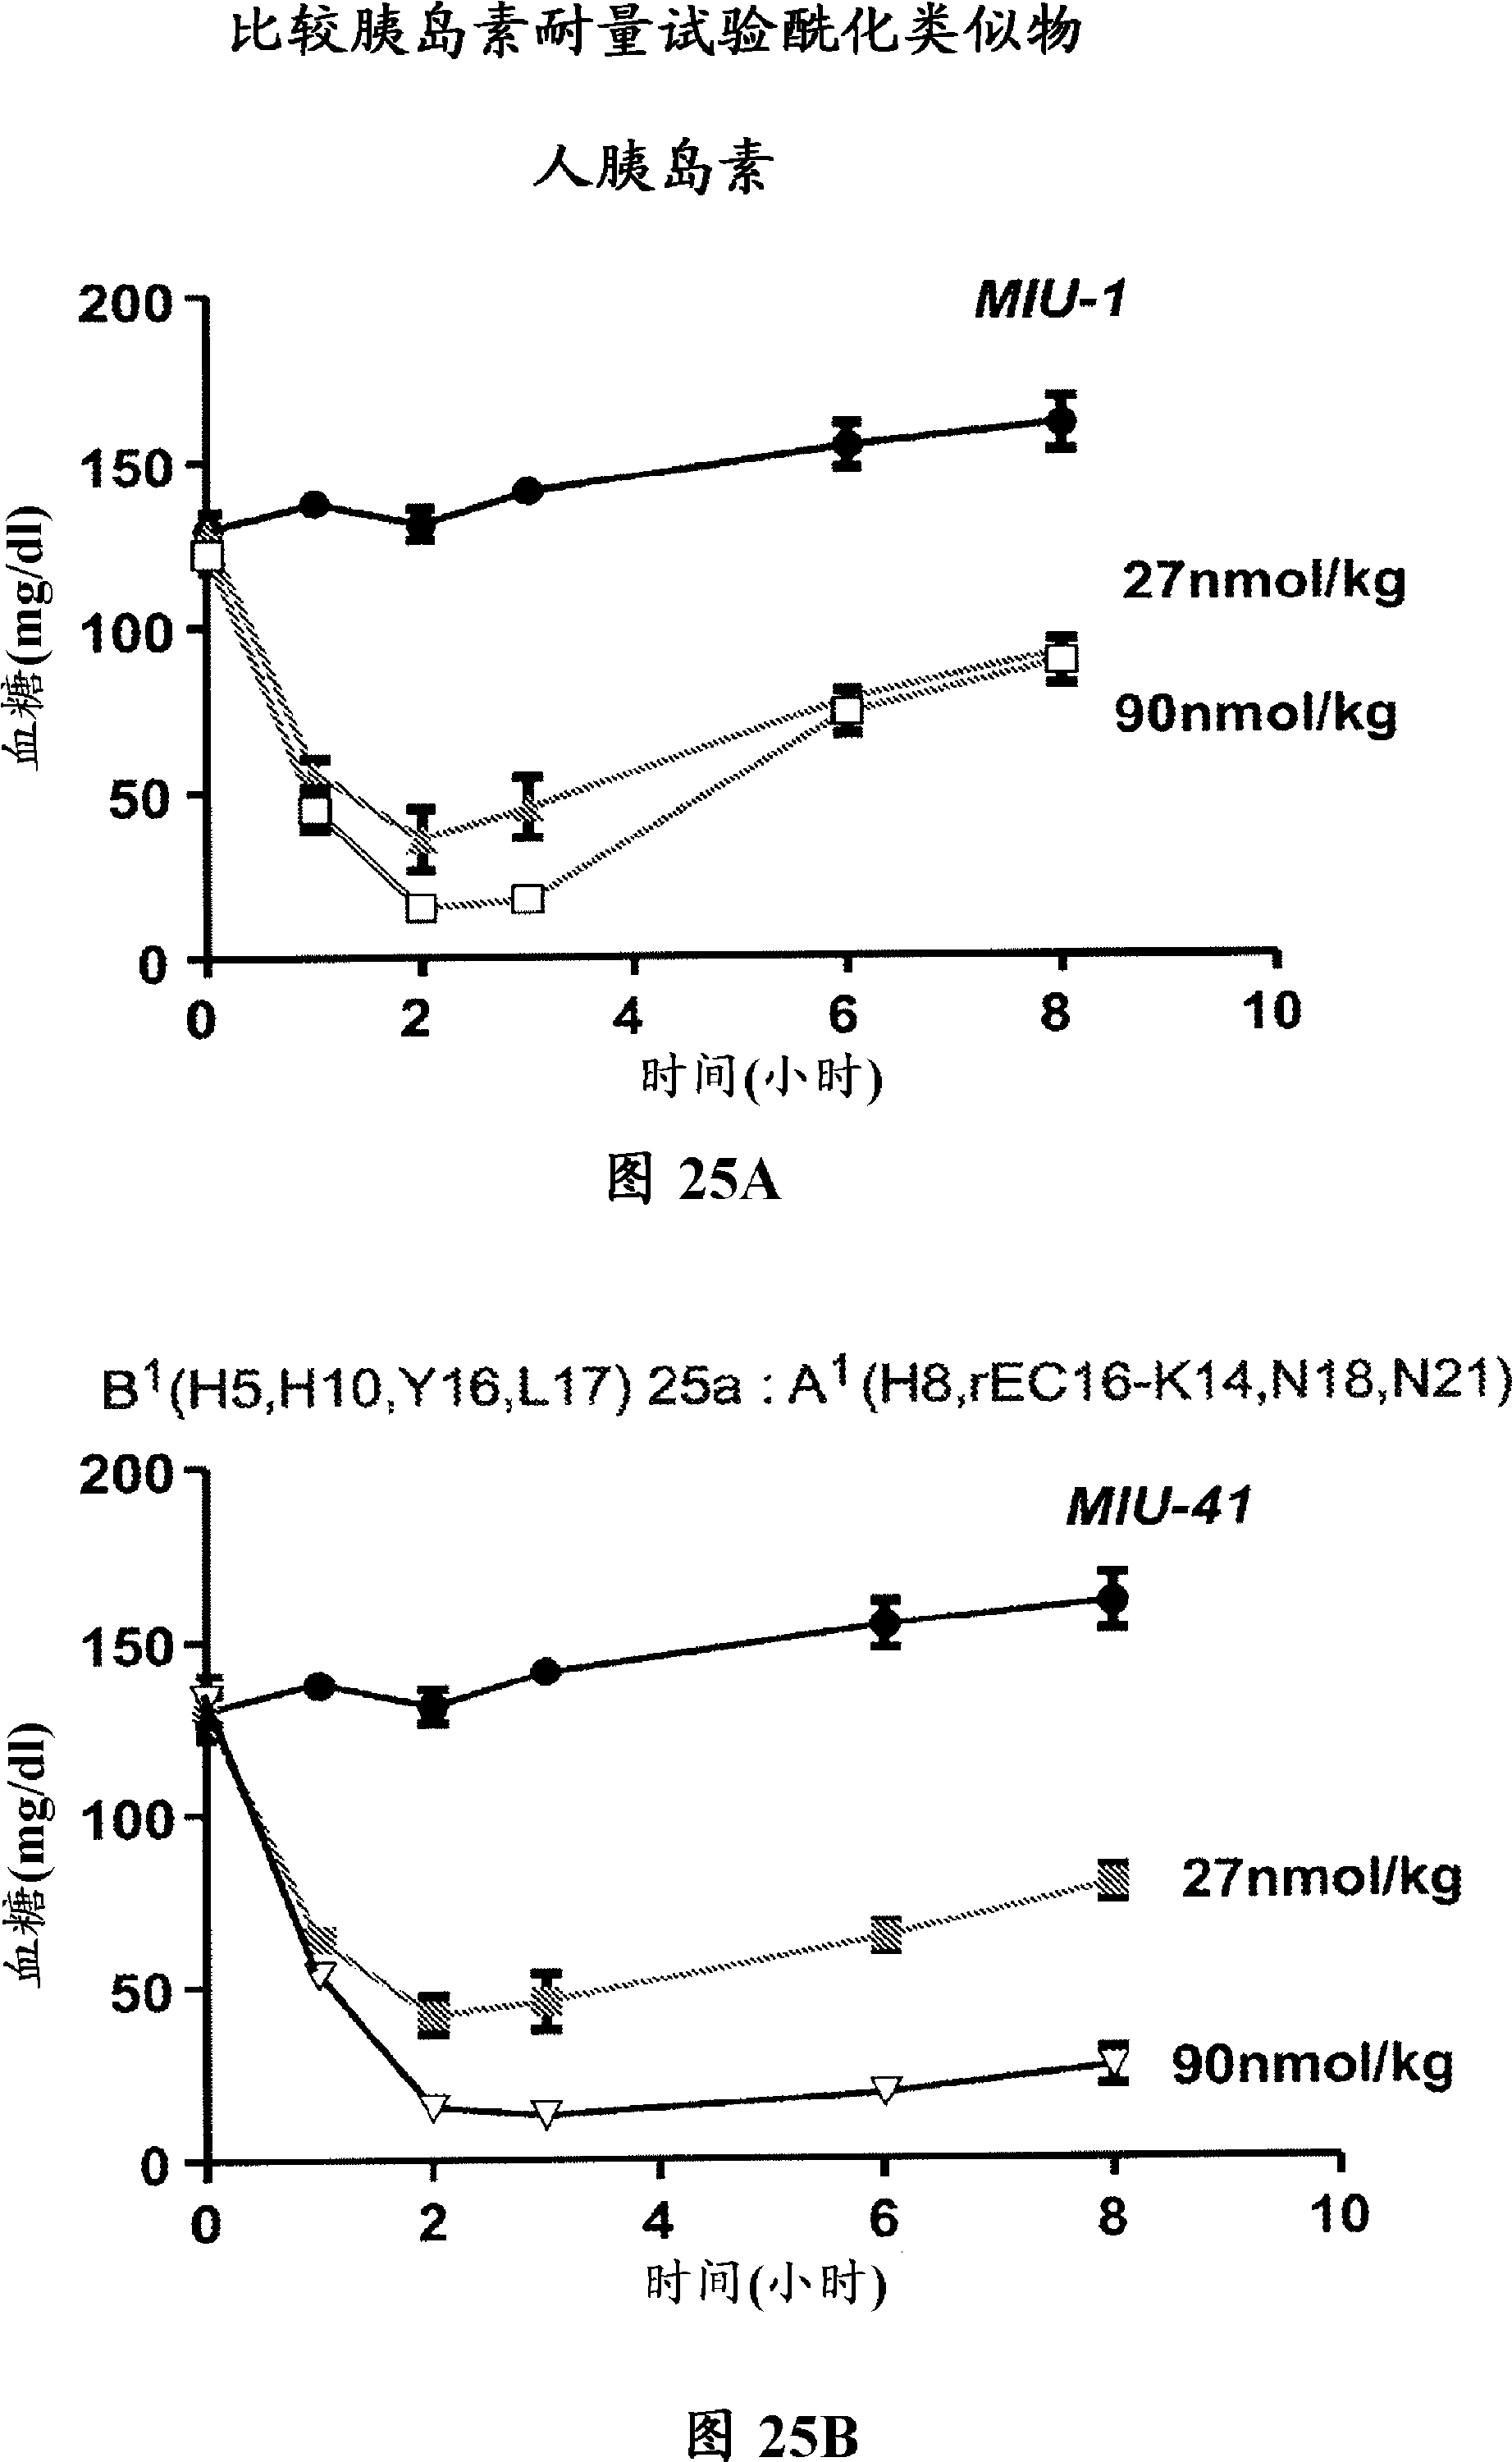 CTP-based insulin analogs for treatment of diabetes